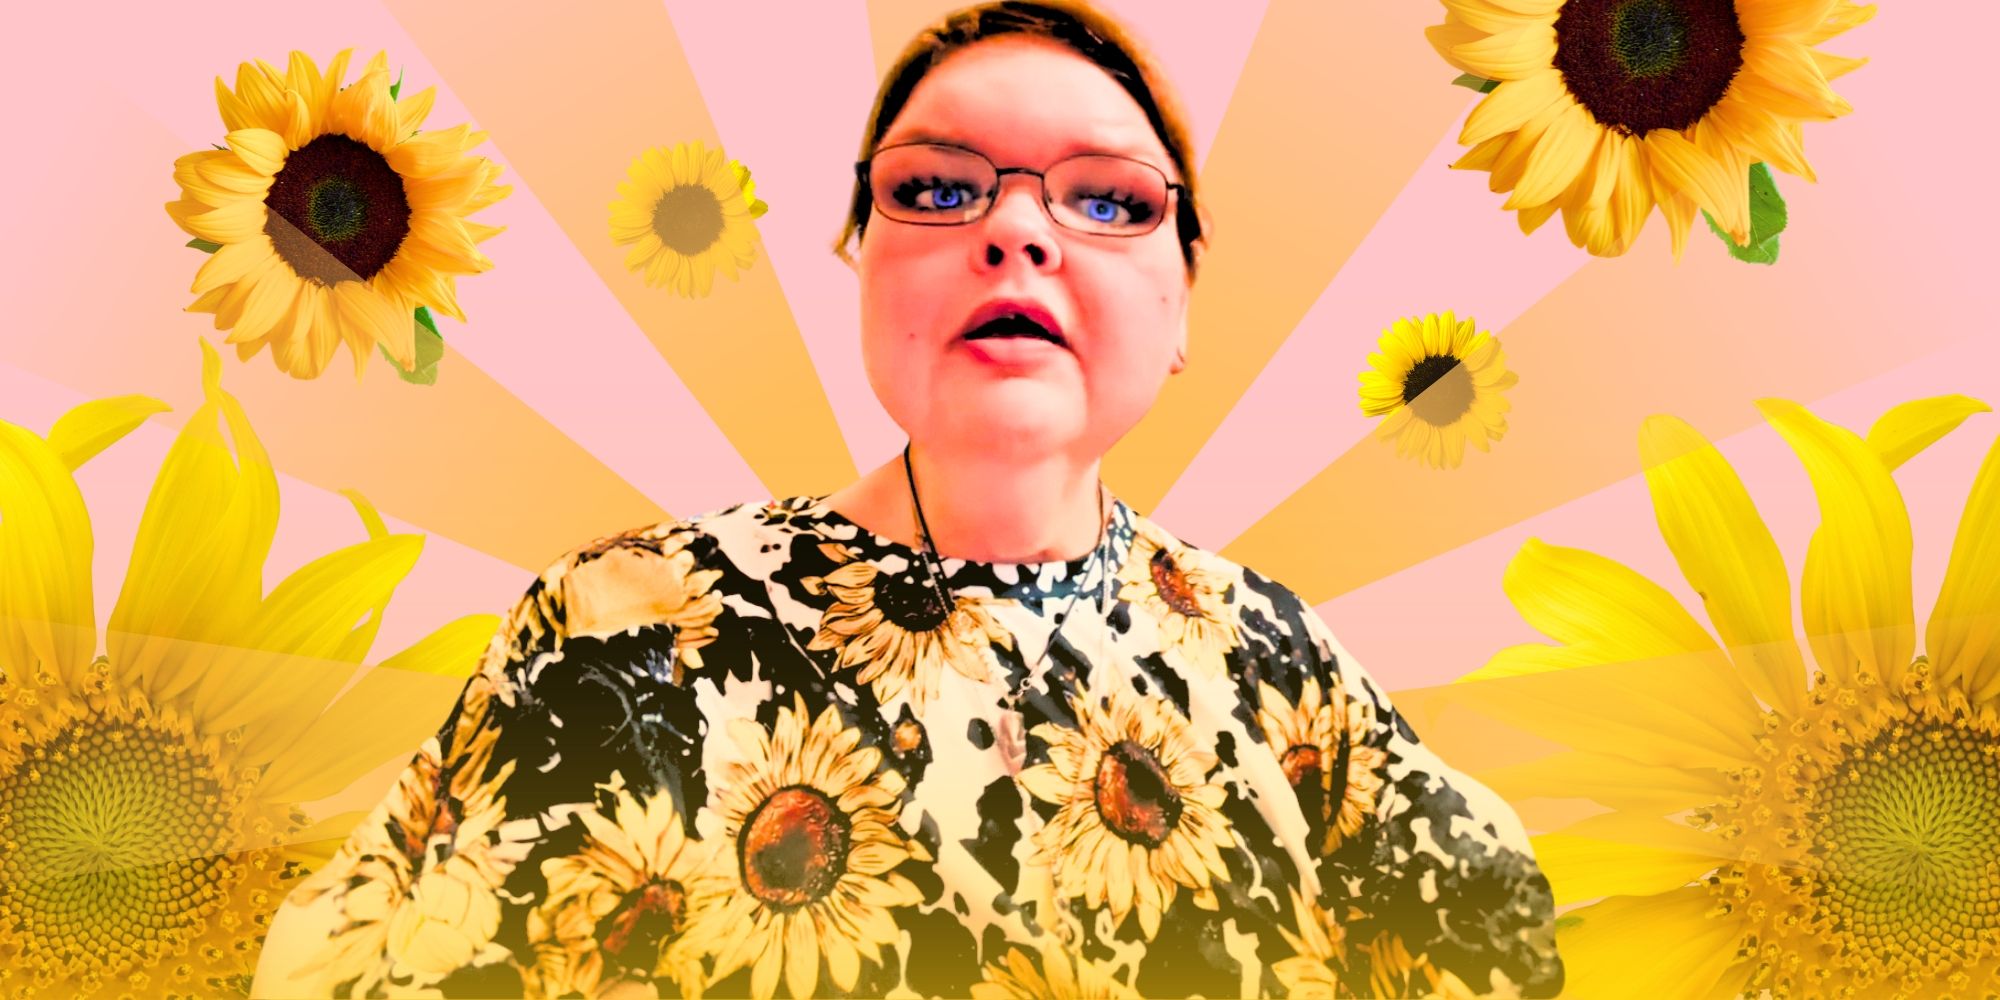 Tammy Slaton sunshine montage 1000 lb sisters tammy with sunflower shirt and the suns rays